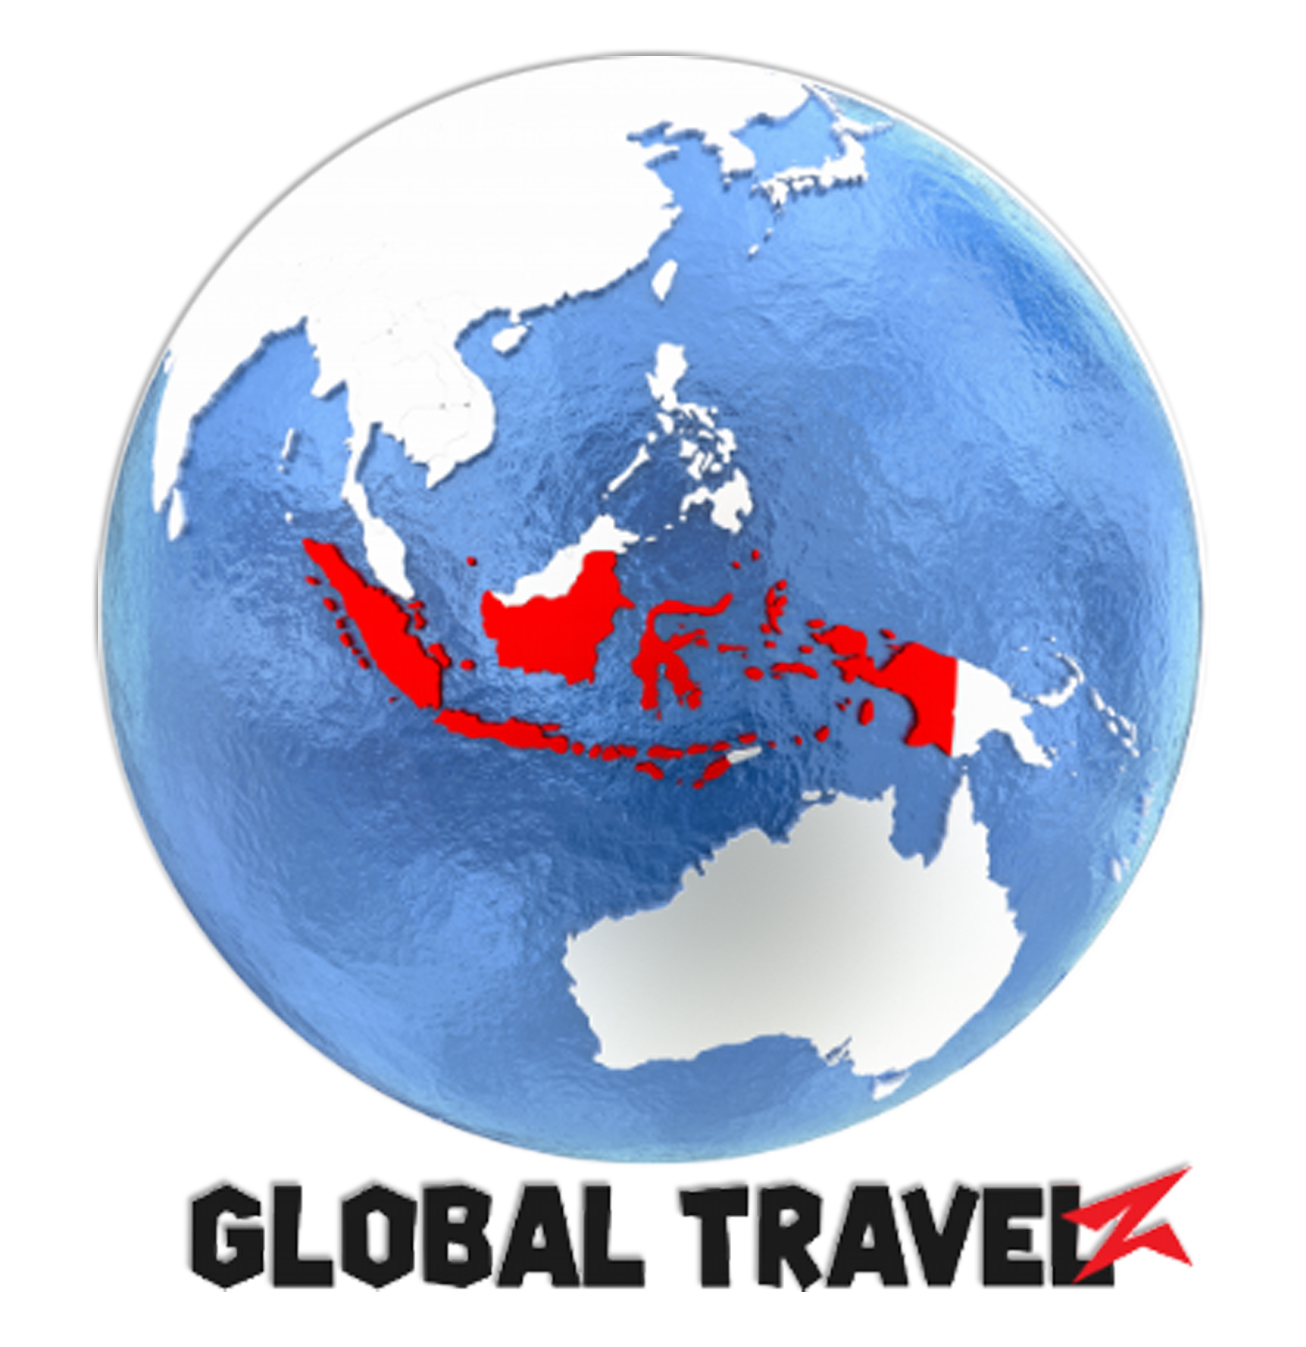 Global Travelz Official Store